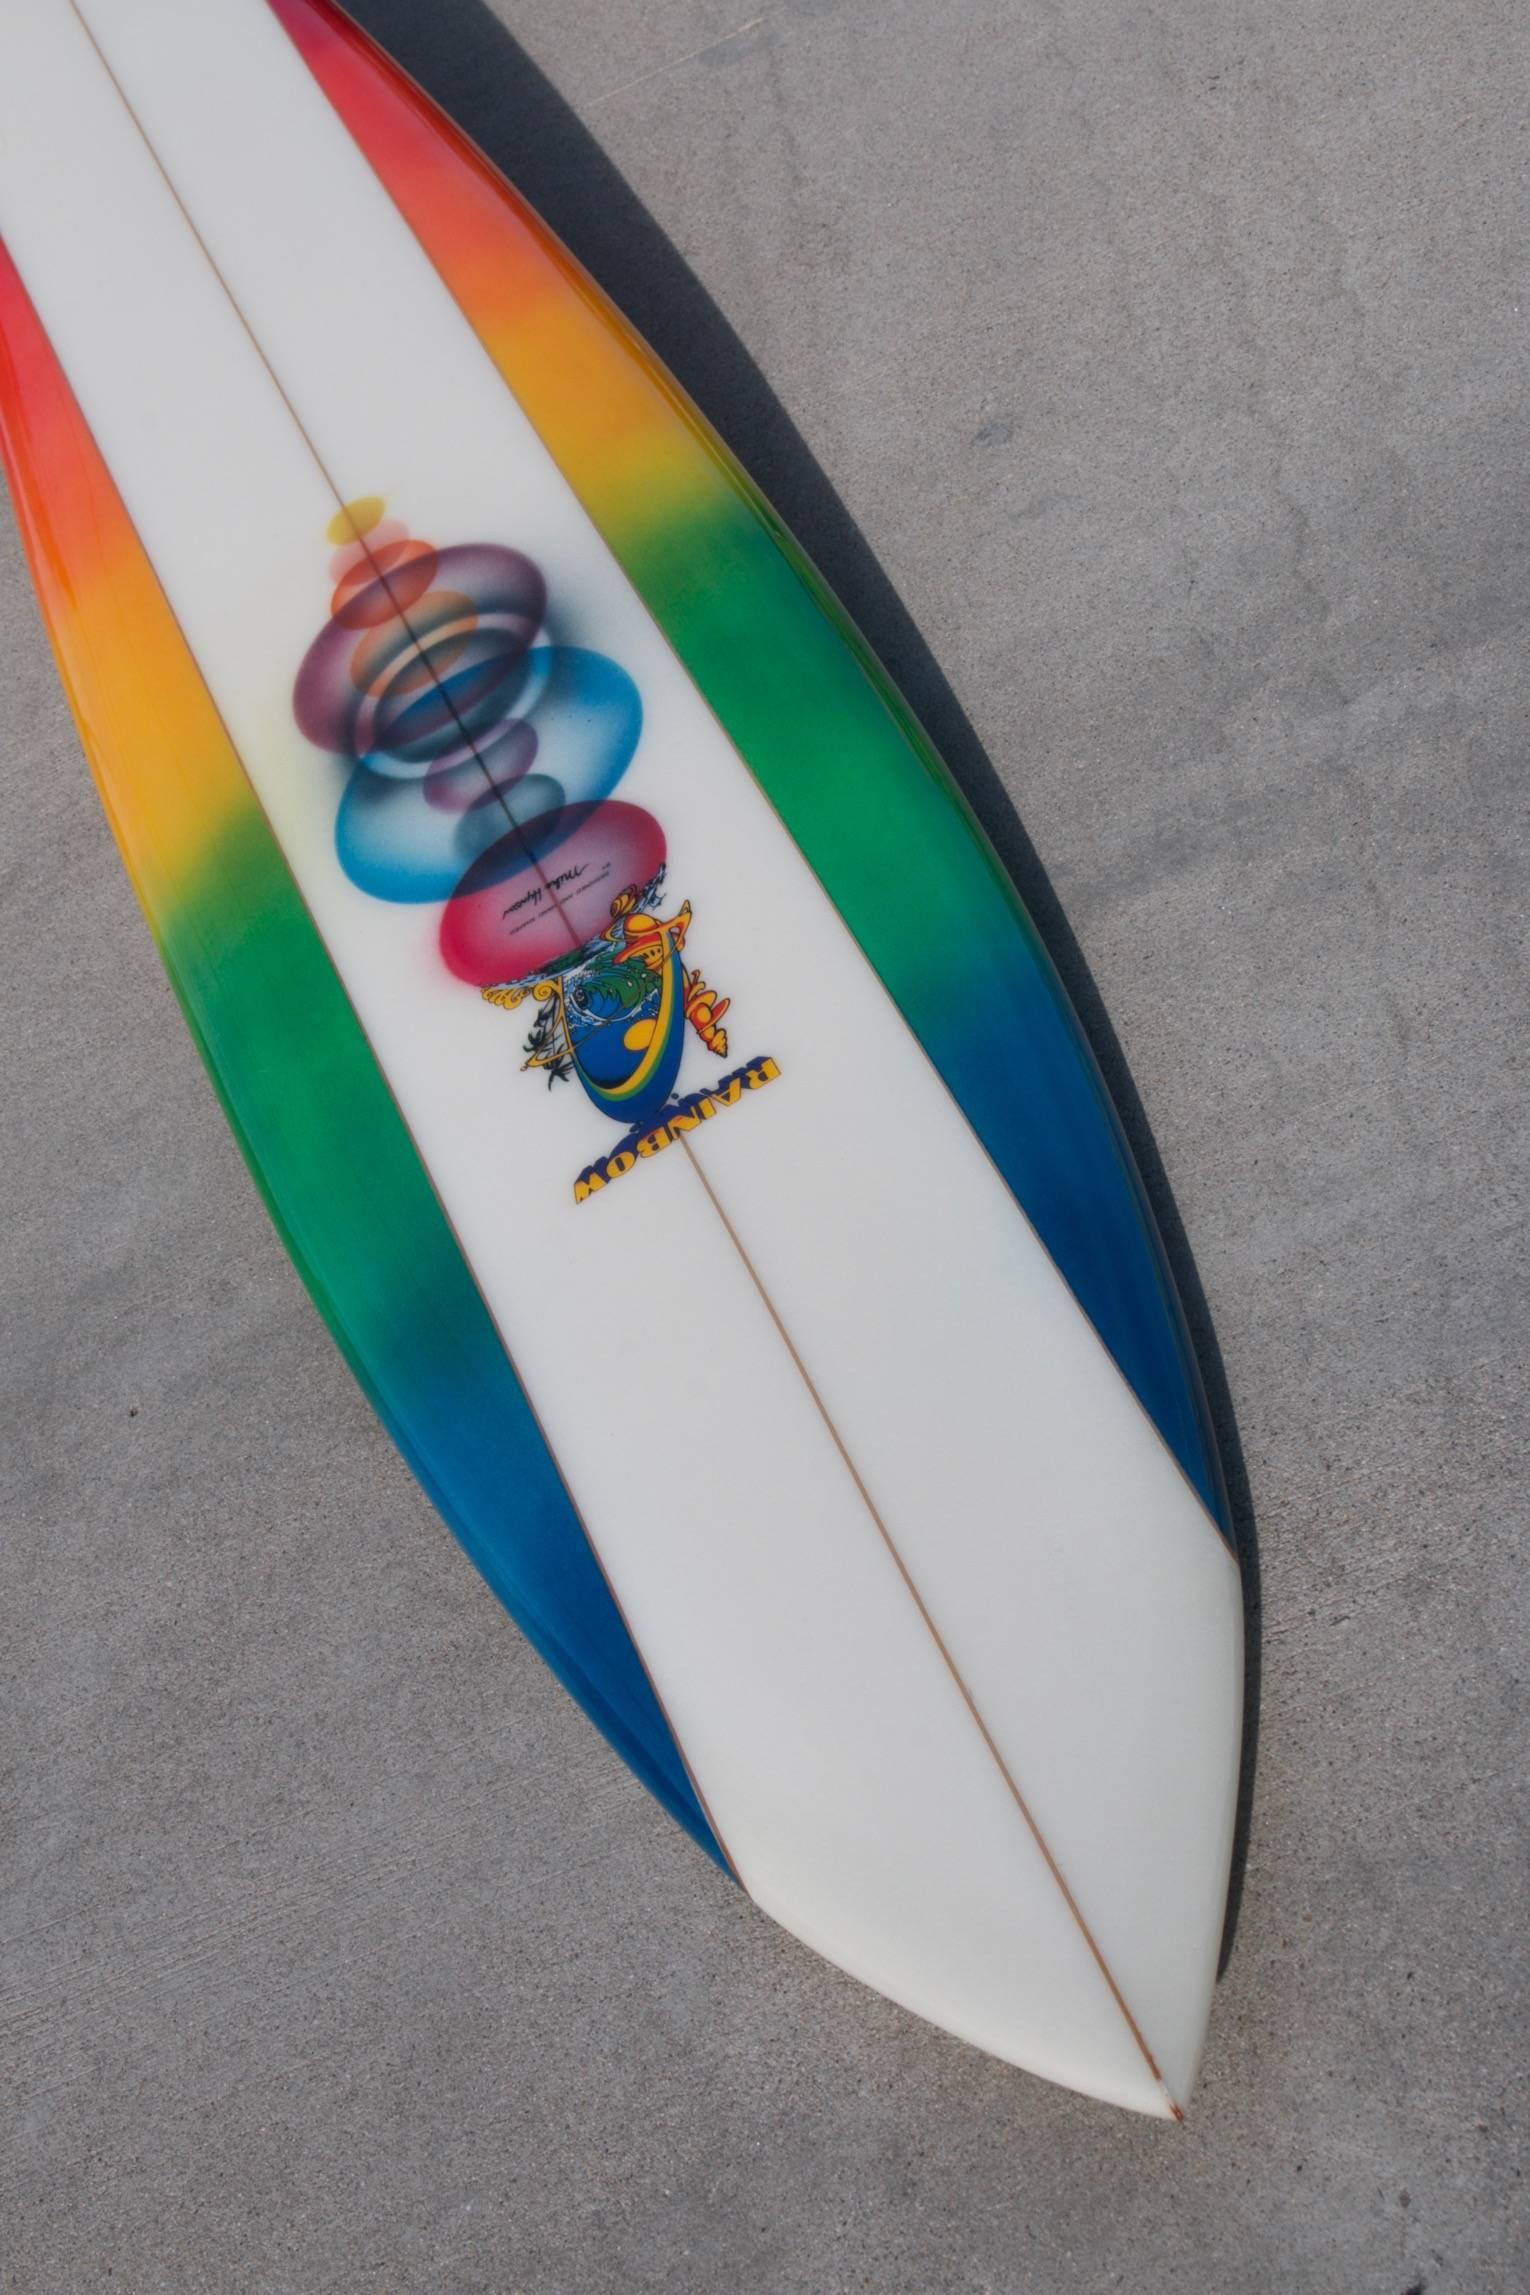 Contemporary Mike Hynson Hand Shaped Rainbow, Big Wave Gun Surfboard, Artwork by Eilers, New For Sale